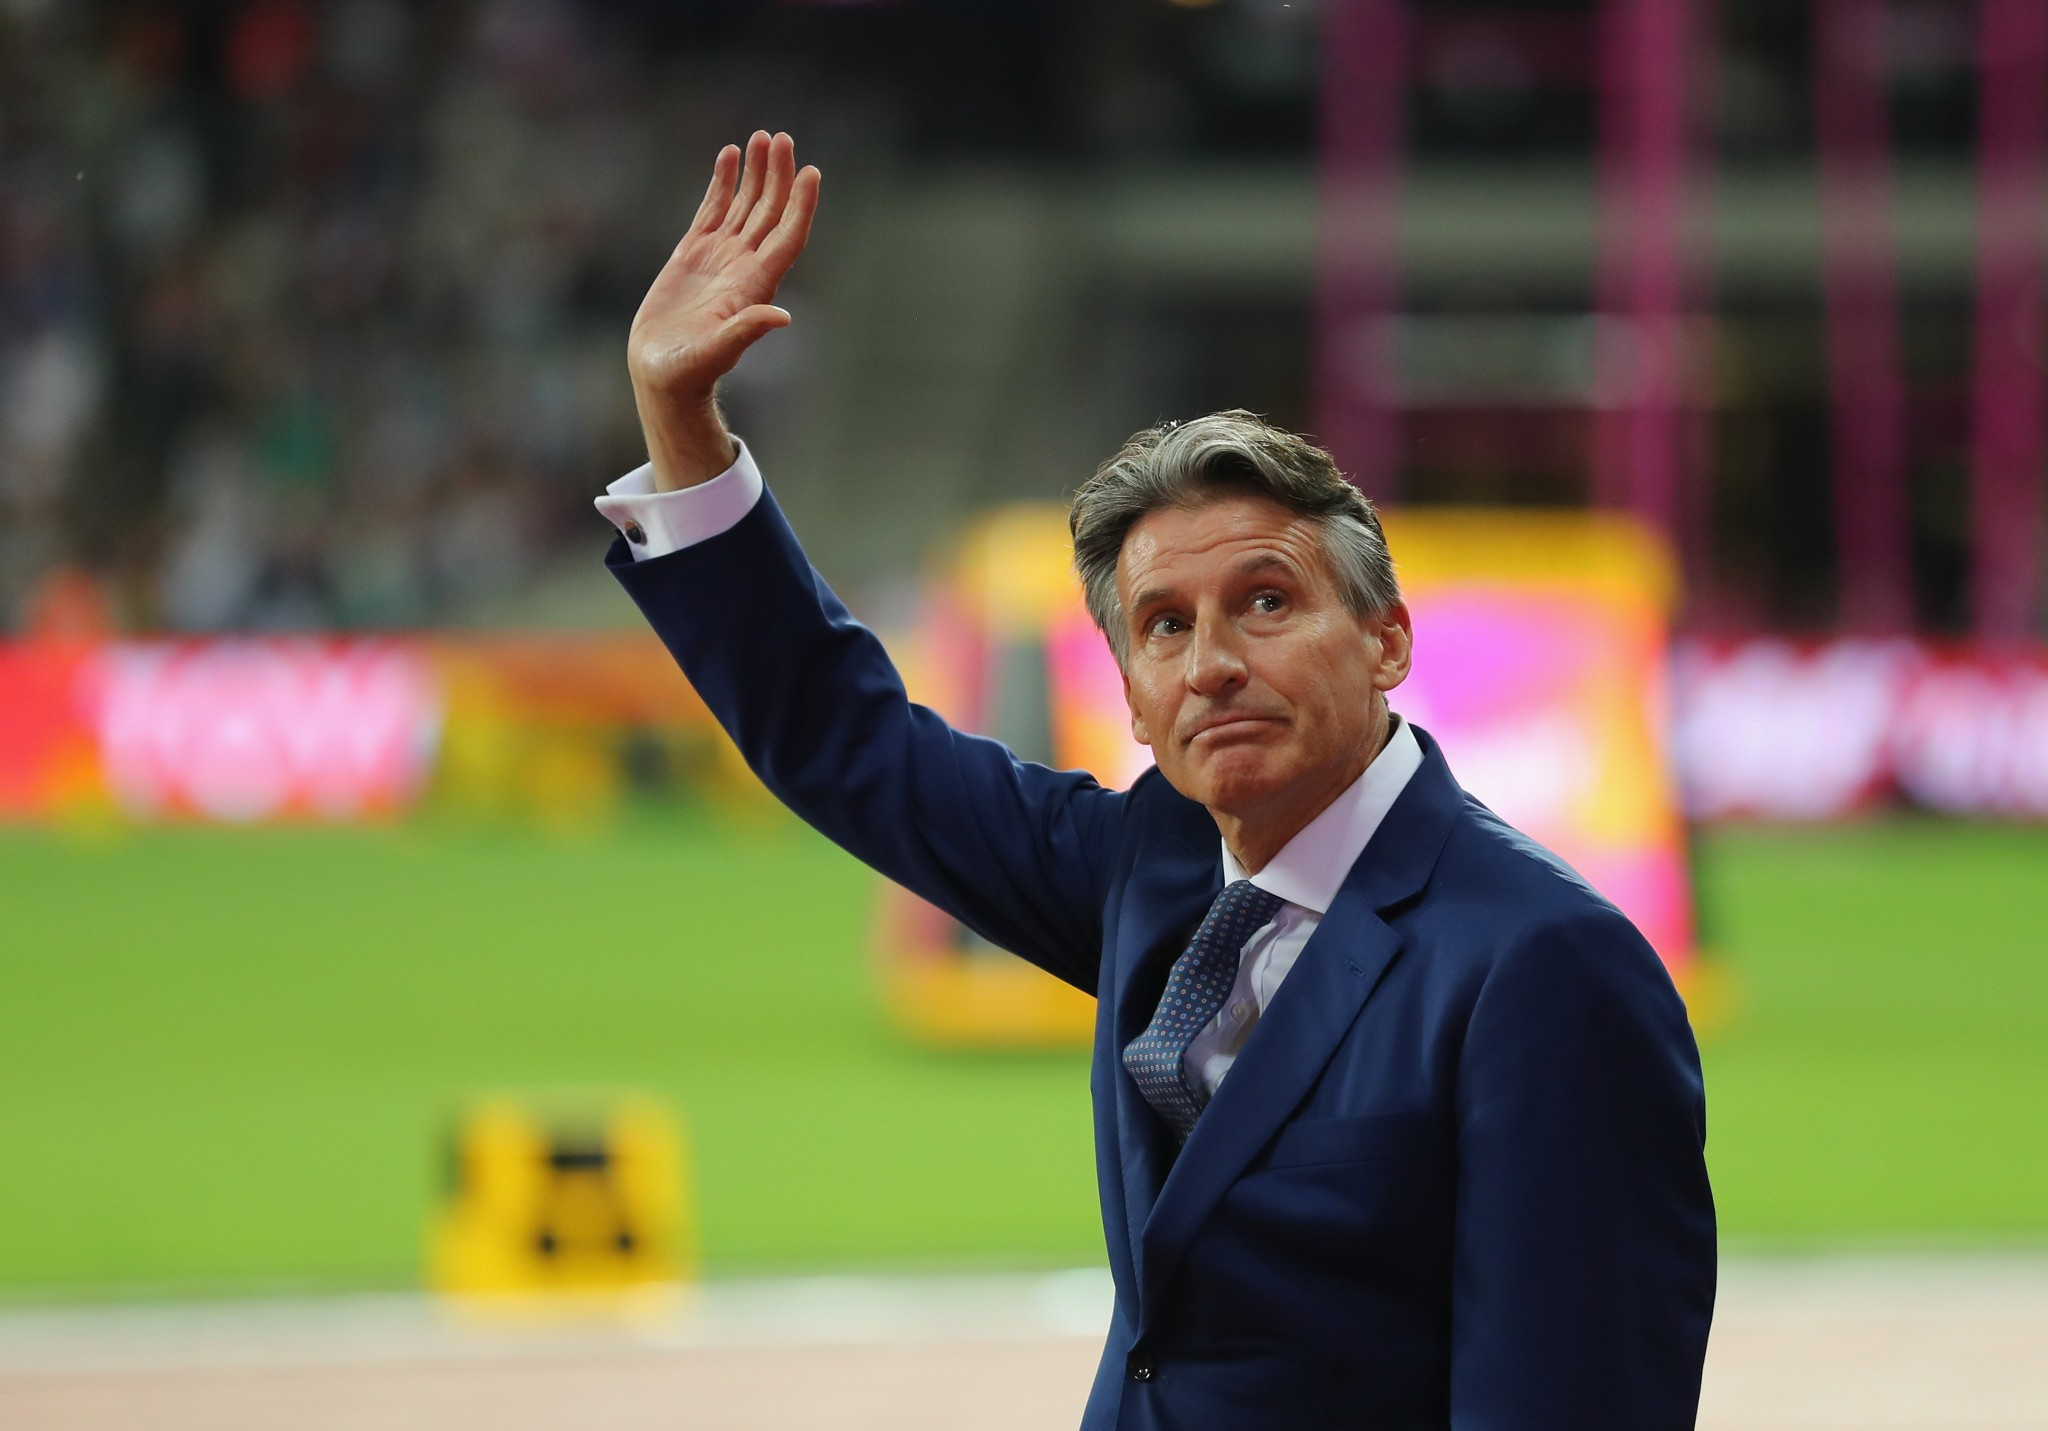 IAAF President Sebastian Coe has hinted his uncertainty towards the validity of a women's 50km race as a World Championships event ©Getty Images